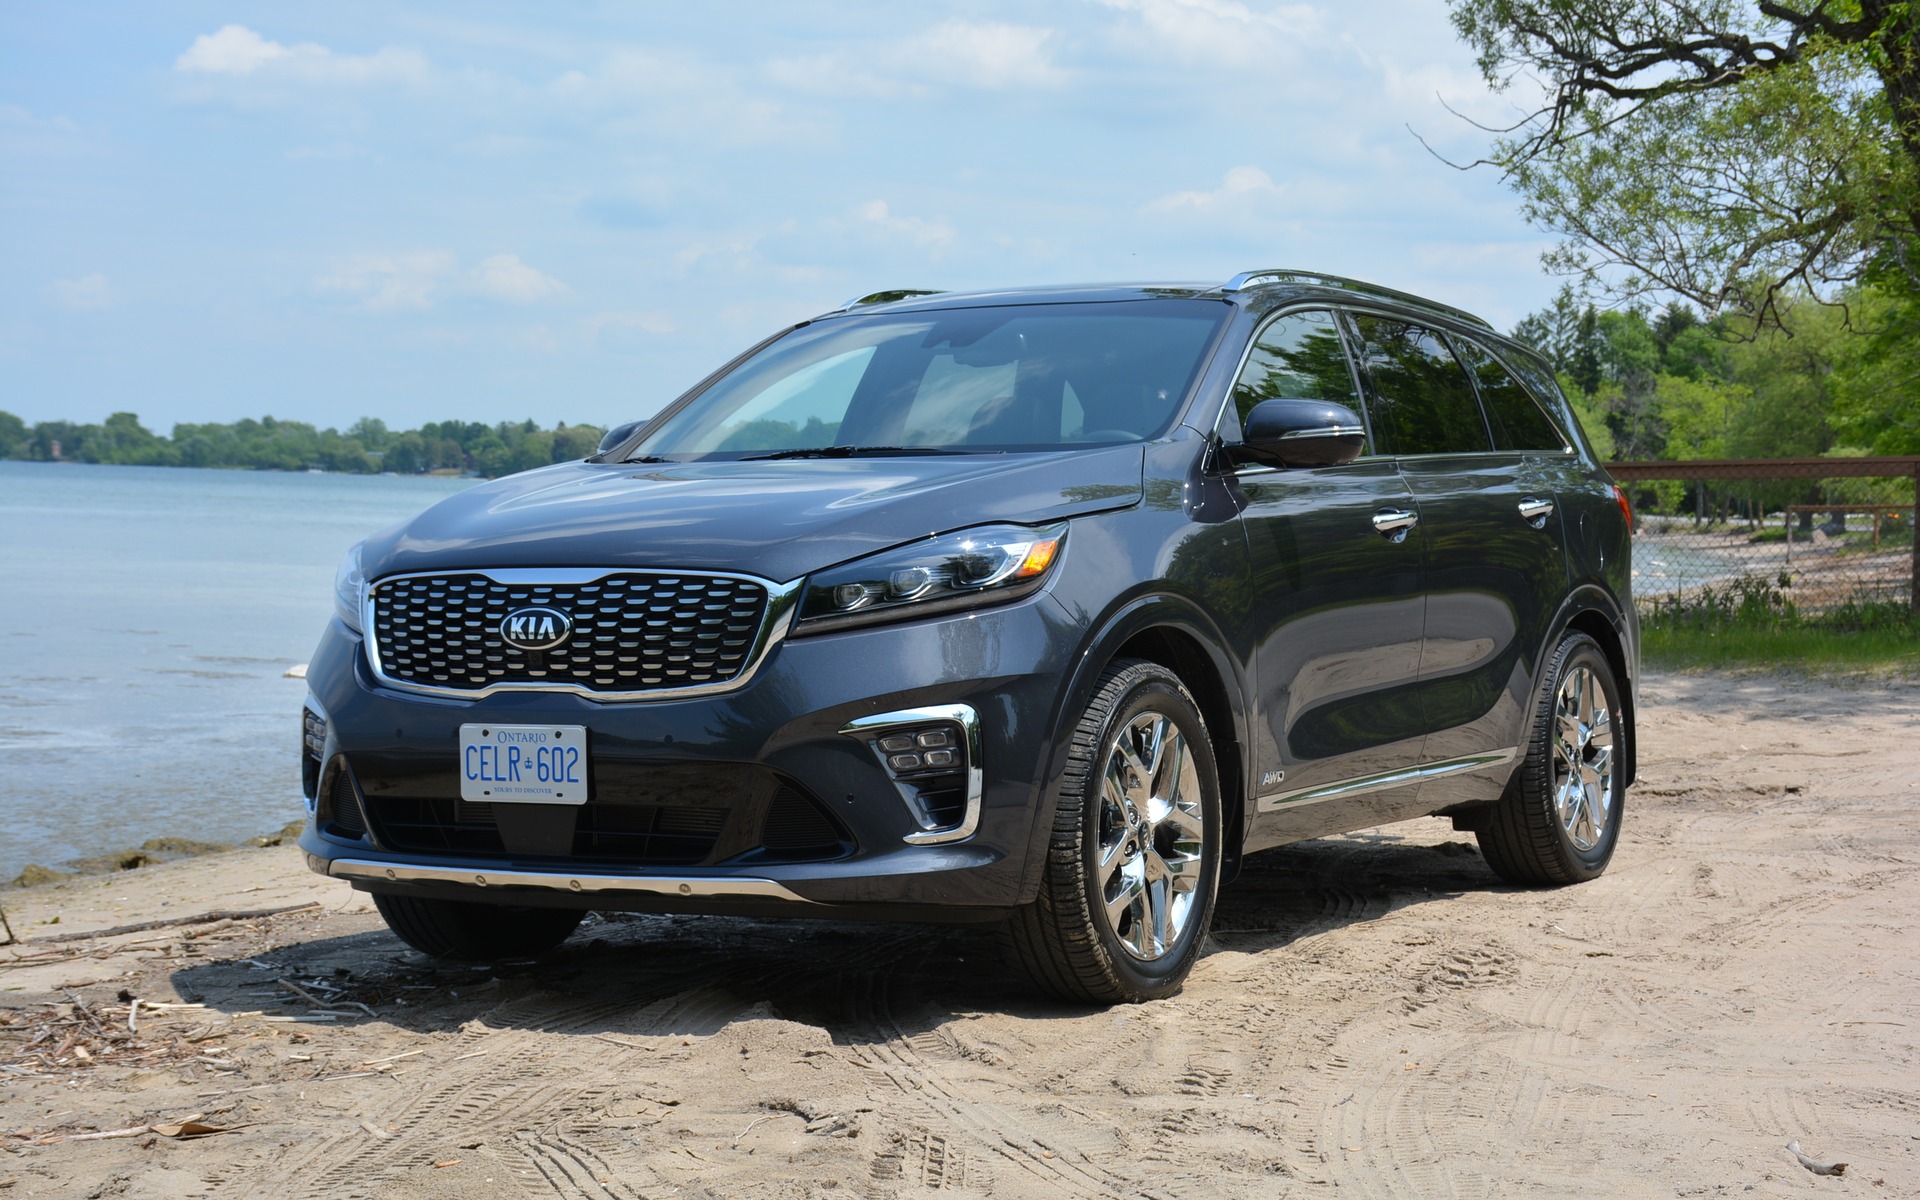 2019 Kia Sorento News, reviews, picture galleries and